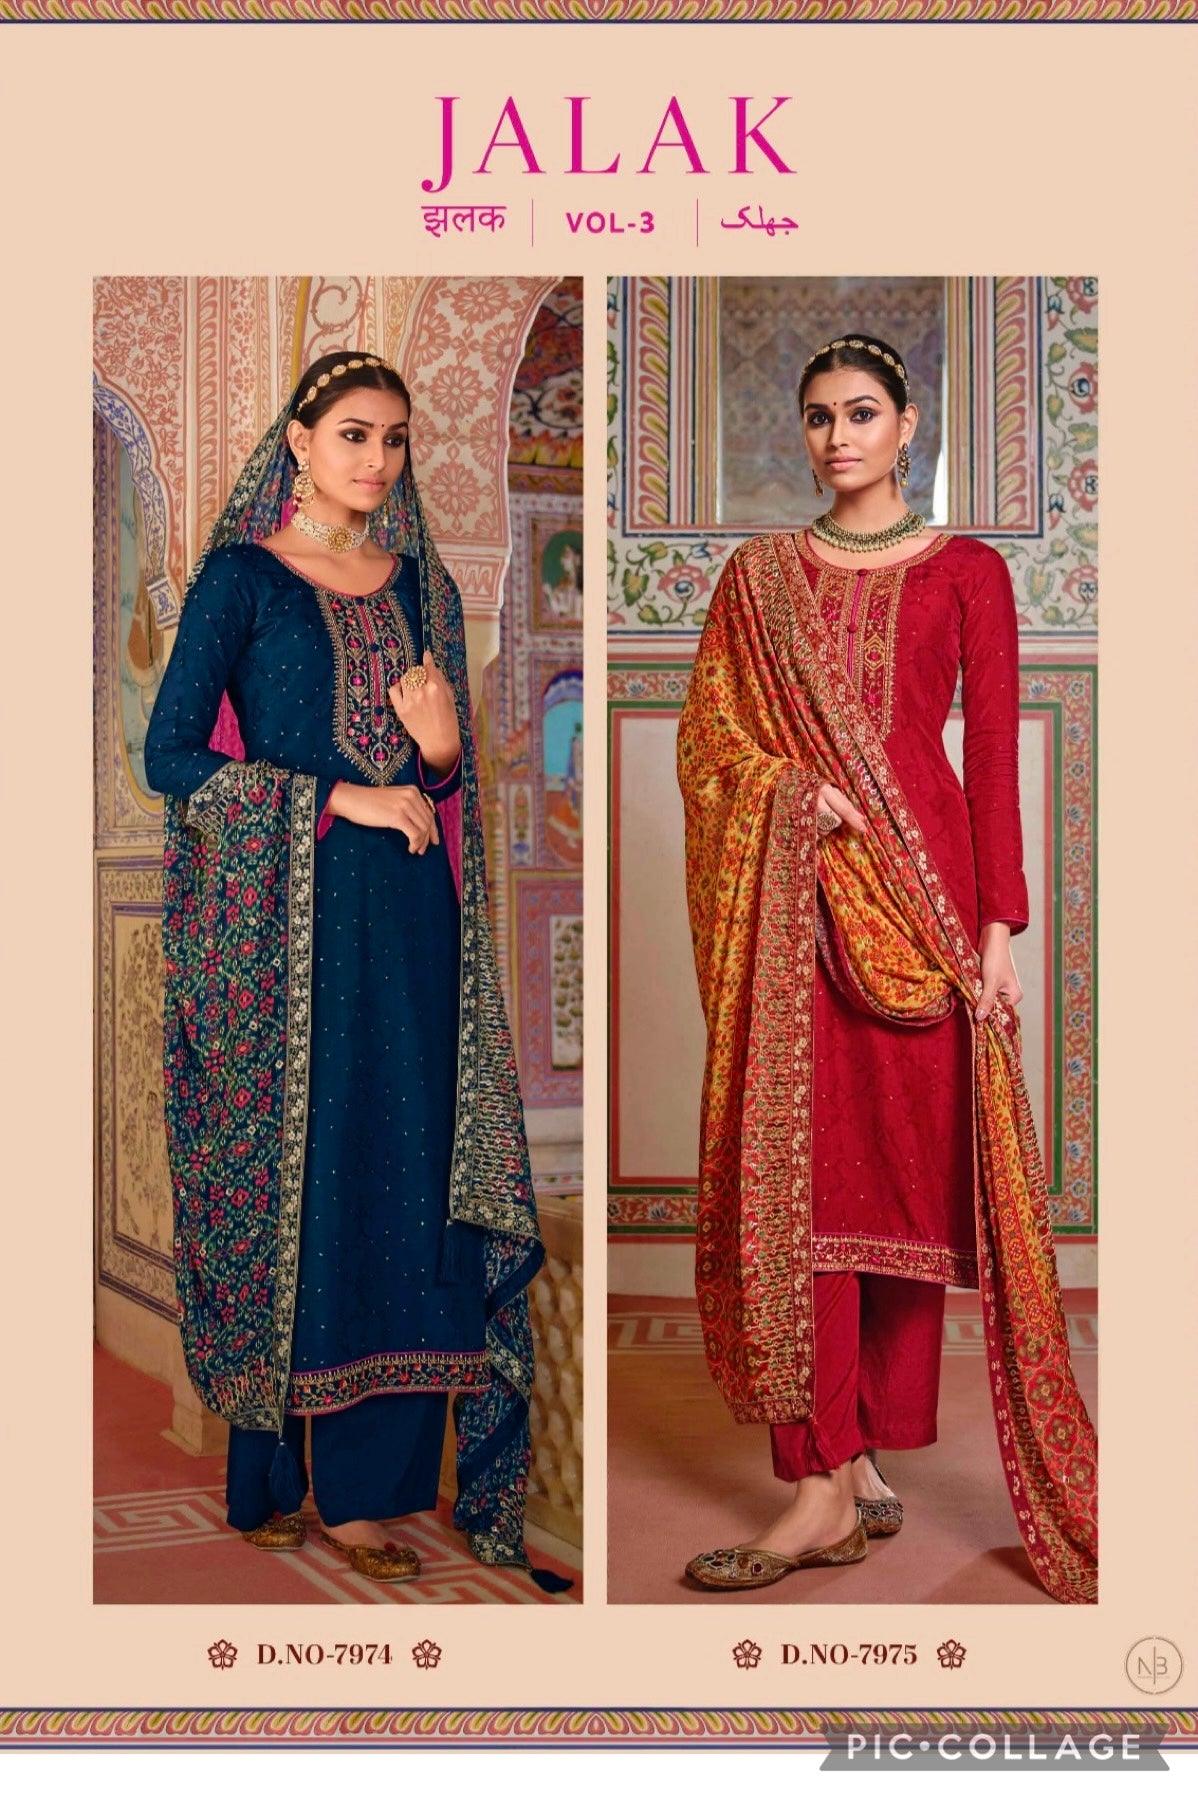 Women’s Round Neck Indian Dola Silk with embroidery sequins works dress, Party wear Salwar kamiz suit dress with Dupatta, M L - Diana's Fashion Factory